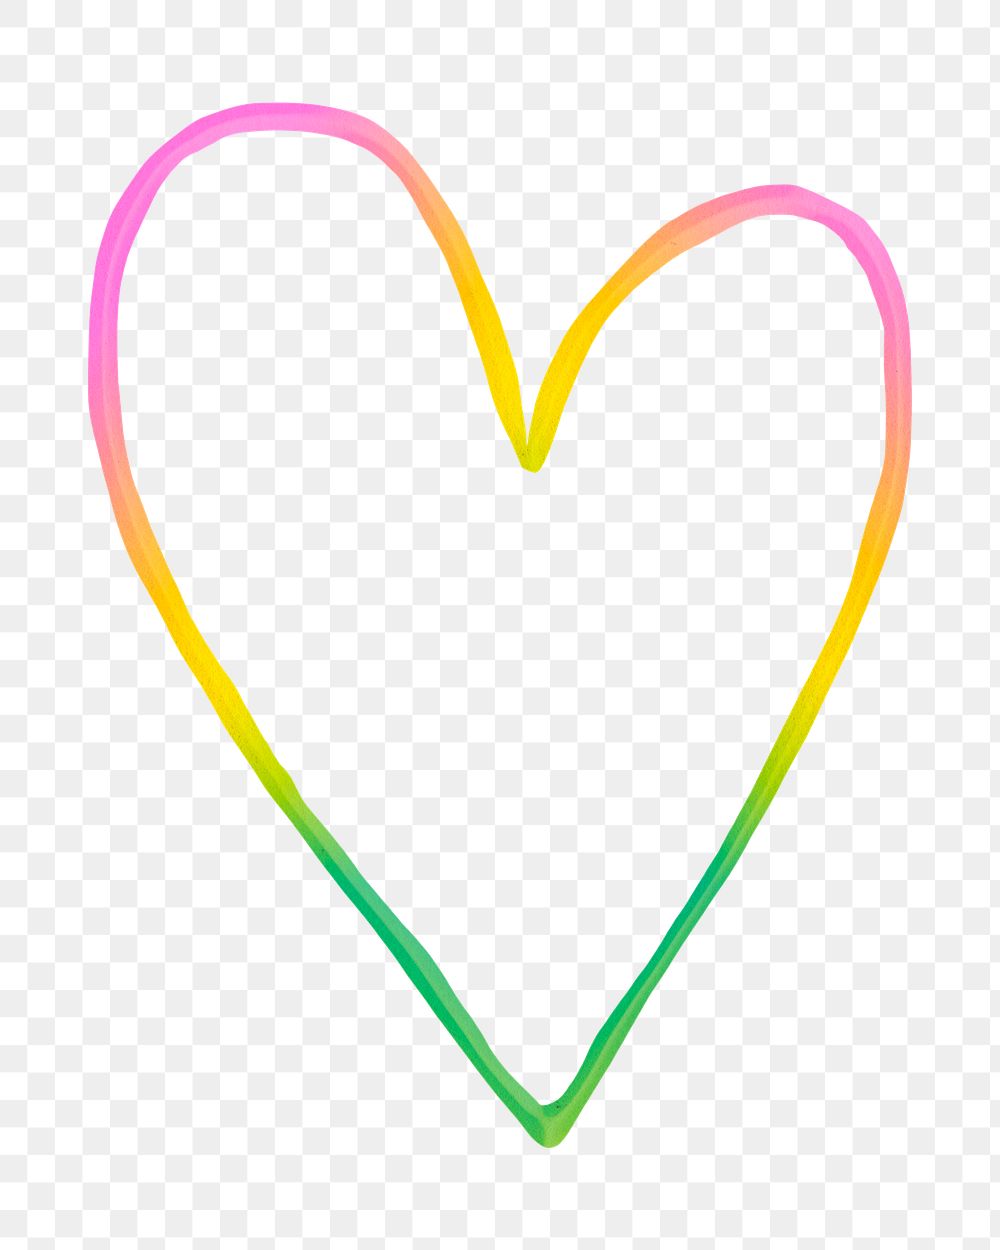 Heart png sticker in colorful color